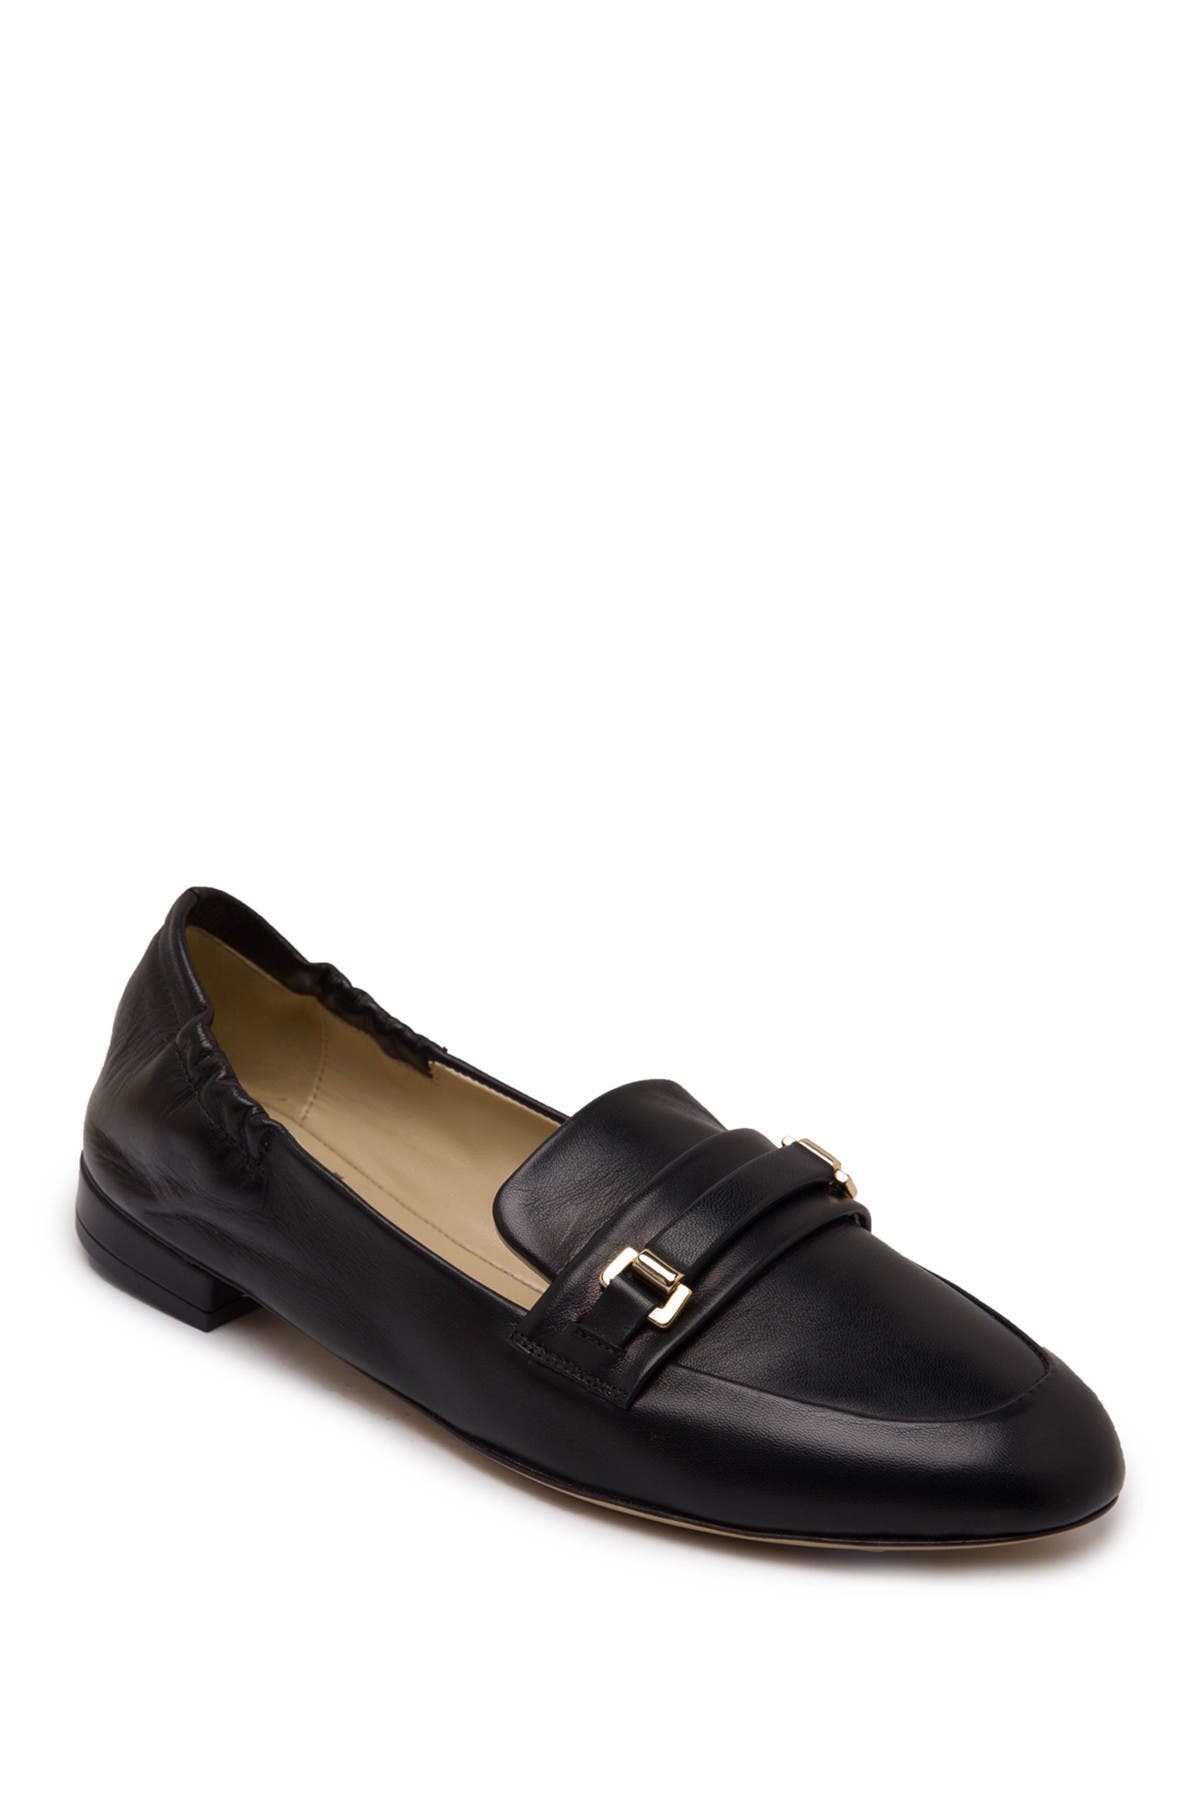 bruno magli women's shoes nordstrom